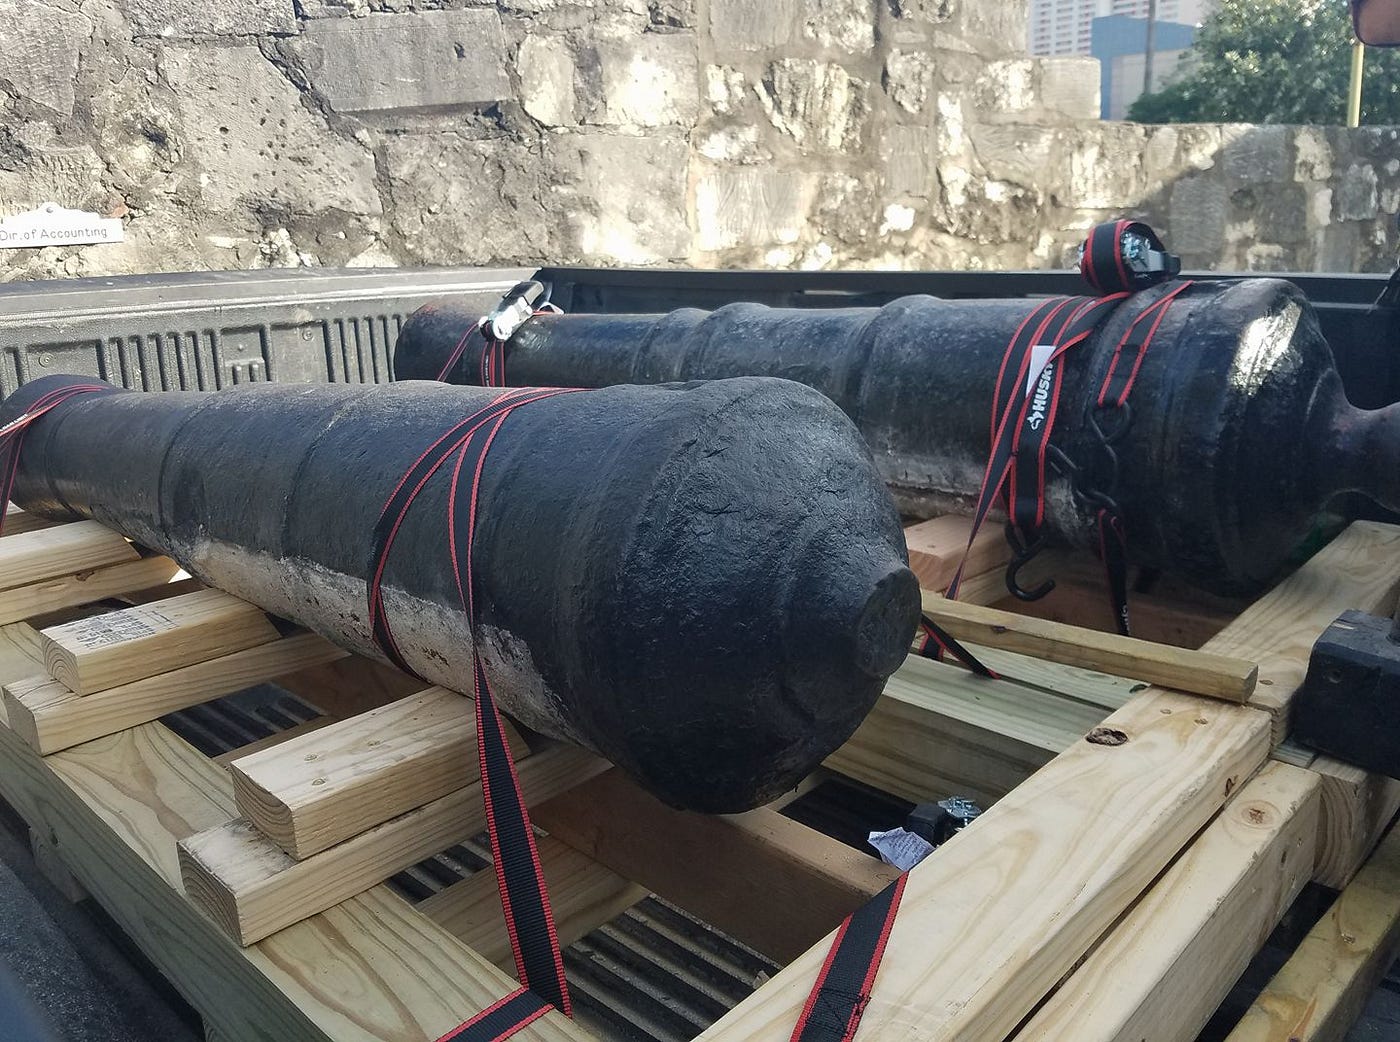 A&M restores and returns cannons, including one used at Alamo